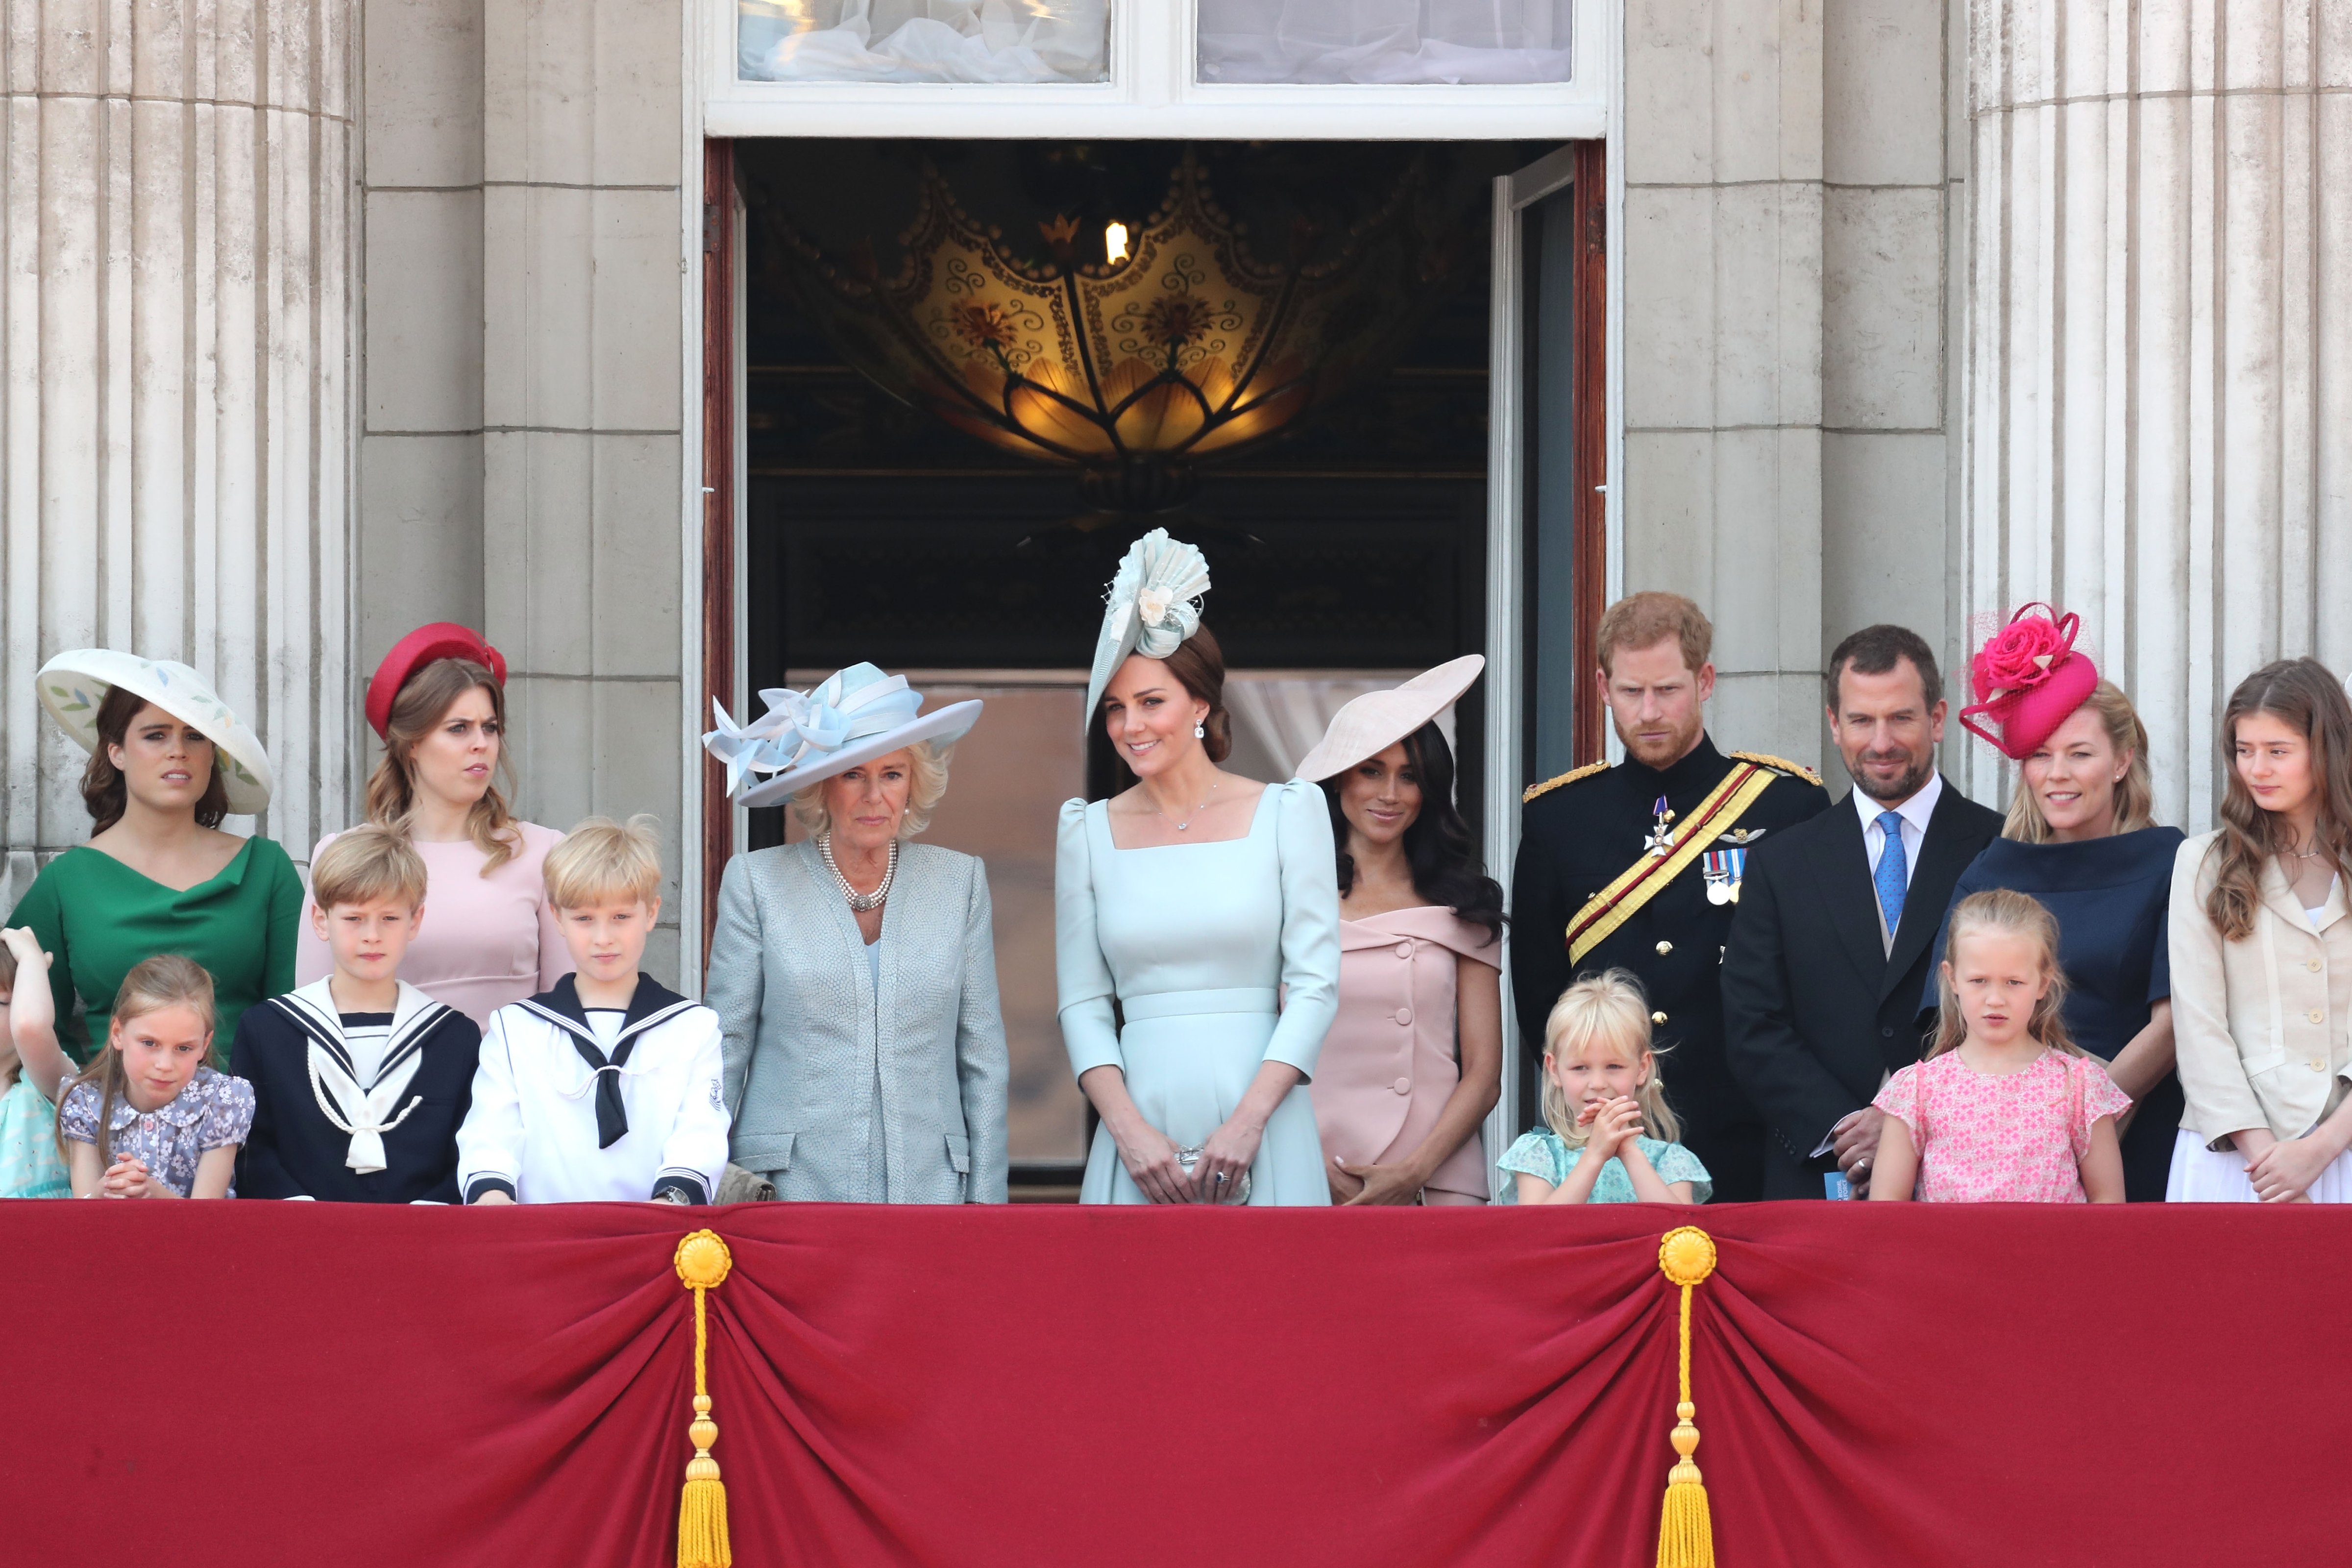 (From left to right) Princess Eugenie, Princess Beatrice, Camilla, Duchess Of Cornwall, Kate Middleton, Duchess of Cambridge, Meghan Markle, Duchess of Sussex, Prince Harry, Duke of Sussex. (Front row, left to right) Peter Phillips, Autumn Phillips, Isla Phillips and Savannah Phillips on the balcony of Buckingham Palace during Trooping The Colour on June 9, 2018 in London, England (Chris Jackson—Getty Images)